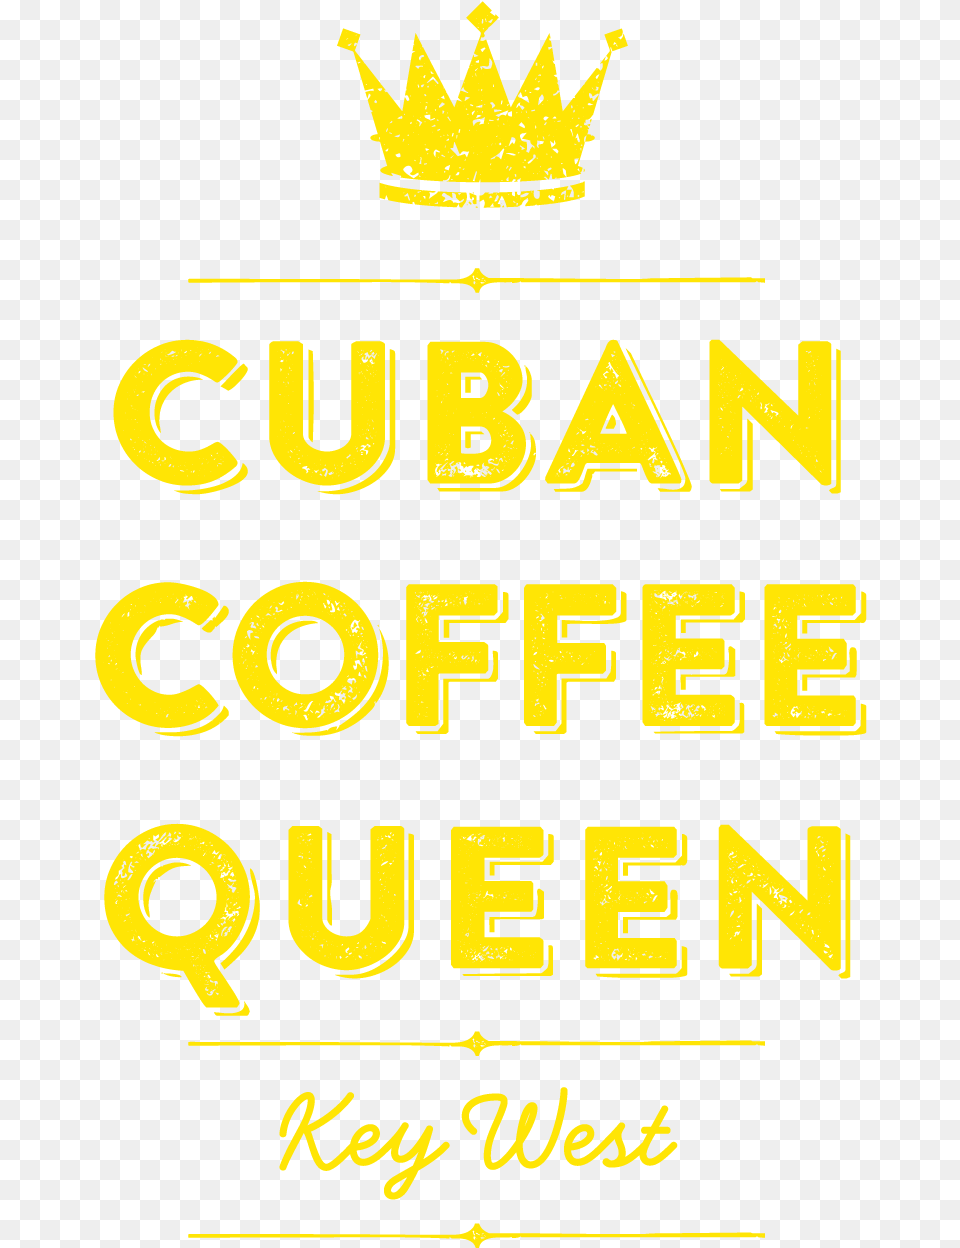 Cuban Coffee Queen Product Cuban Coffee Queen Key West Logo, Accessories, Advertisement, Jewelry, Poster Png Image